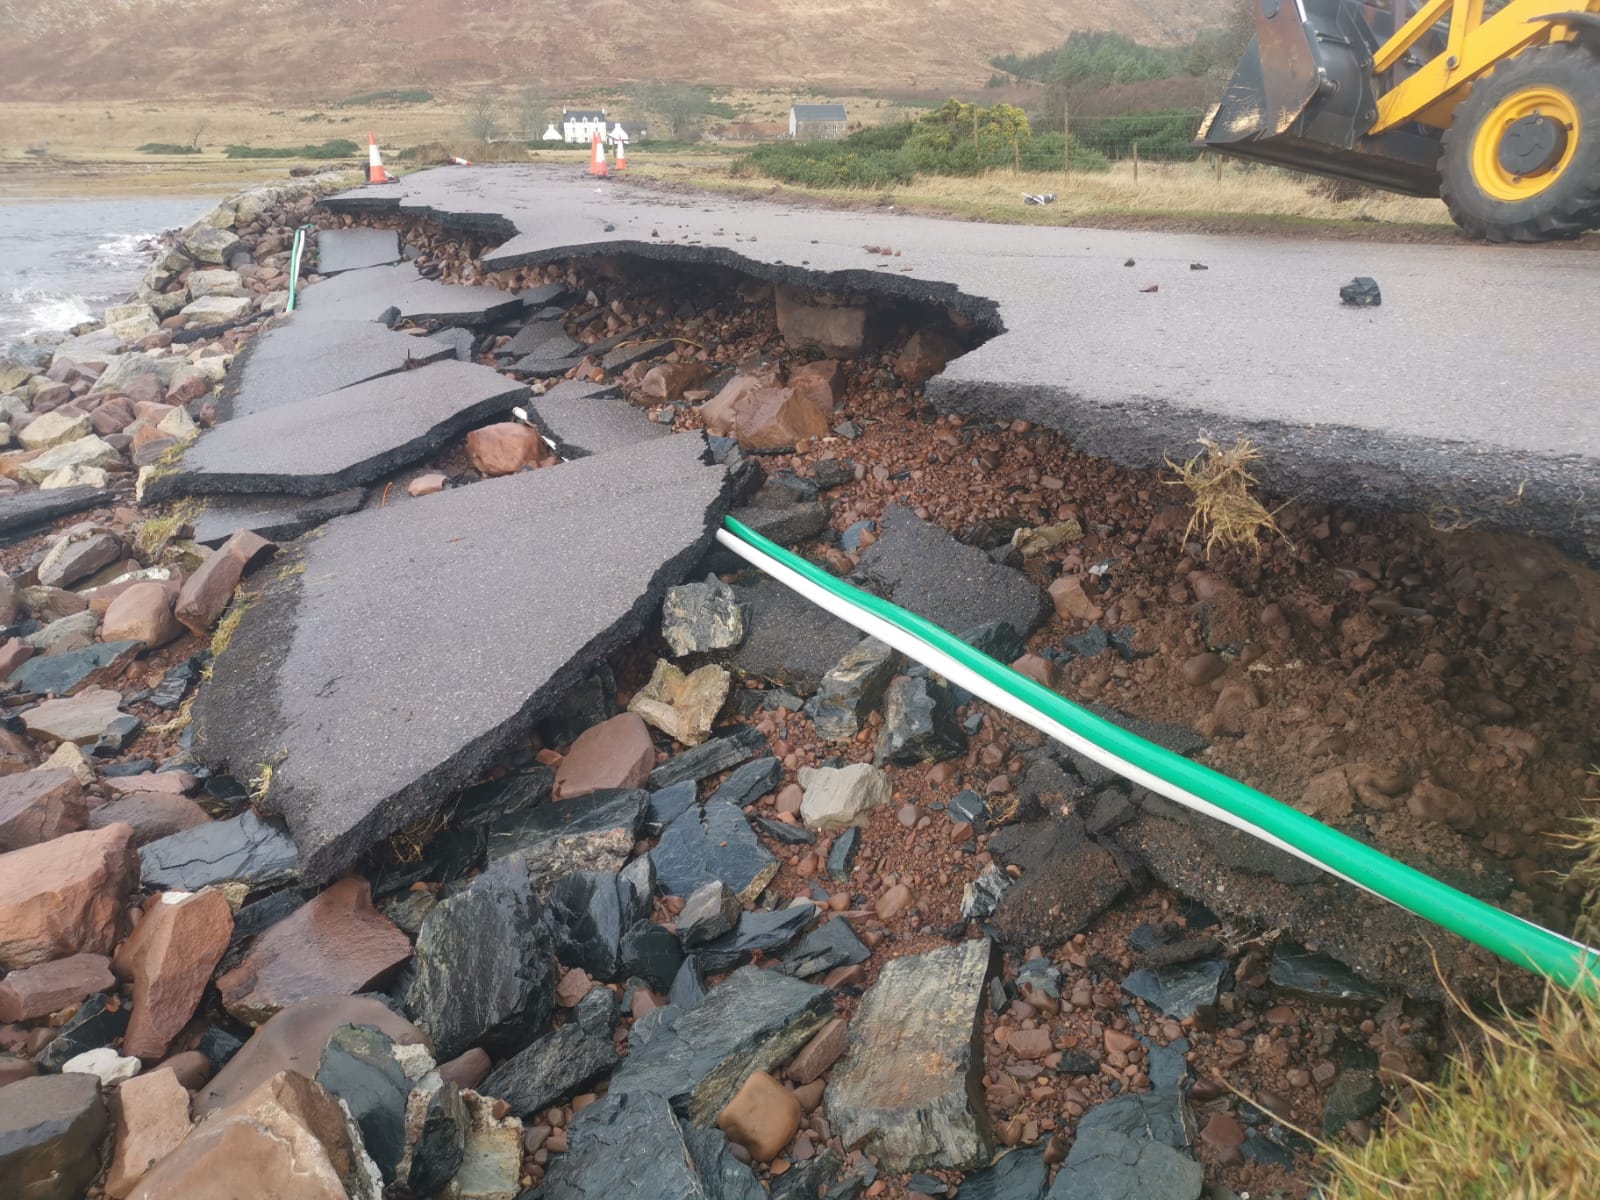 Some of the storm damage at Applecross.